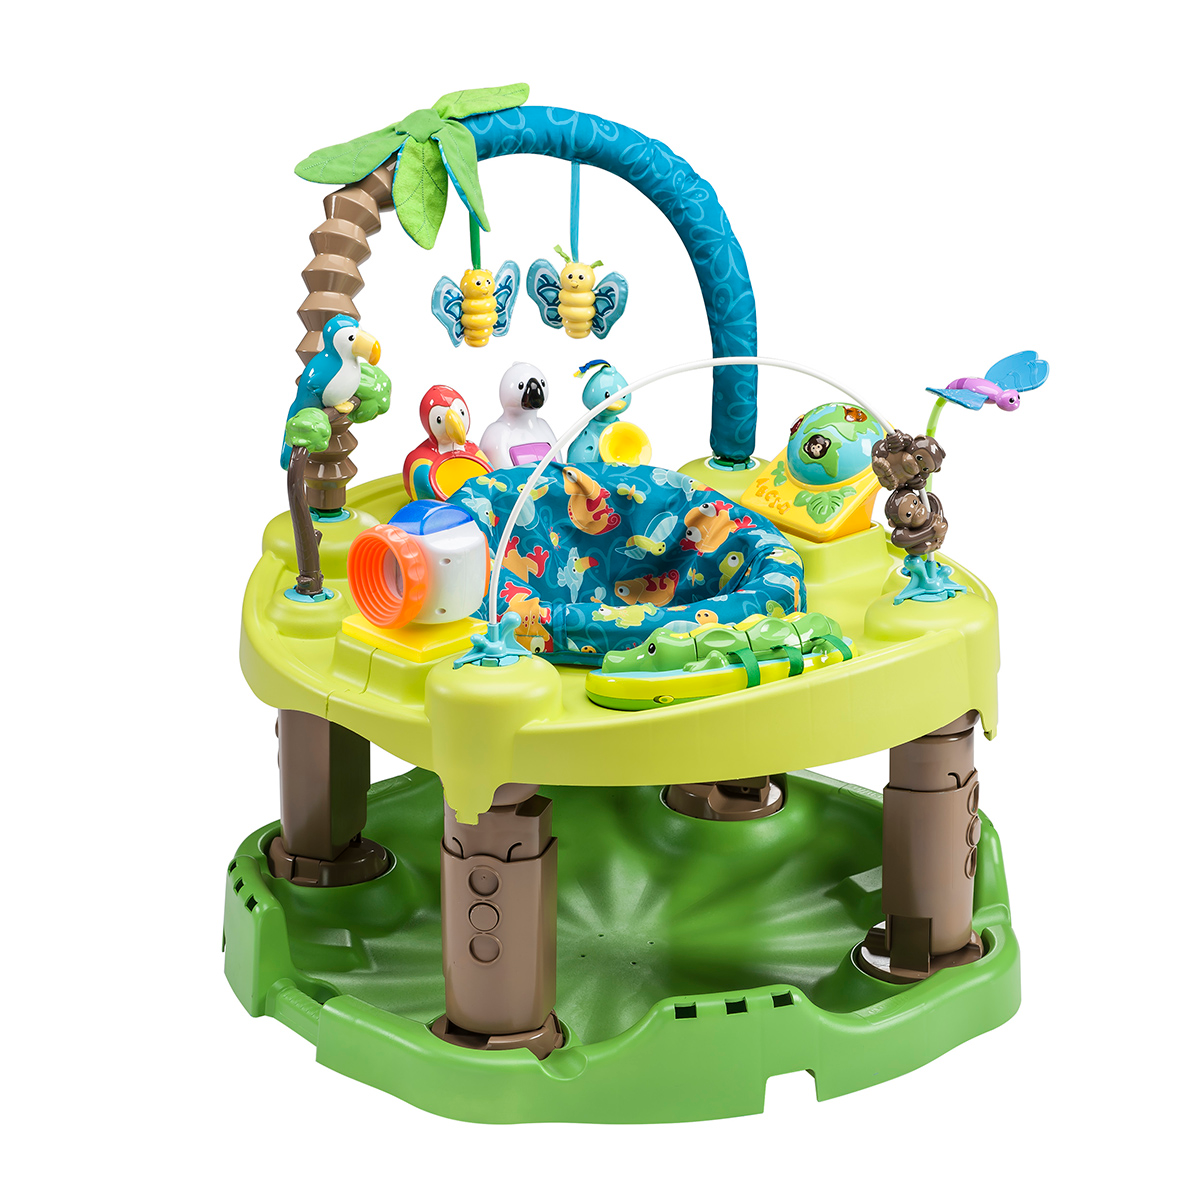 Life In The Amazon Triple Fun Bouncing Activity Saucer Support